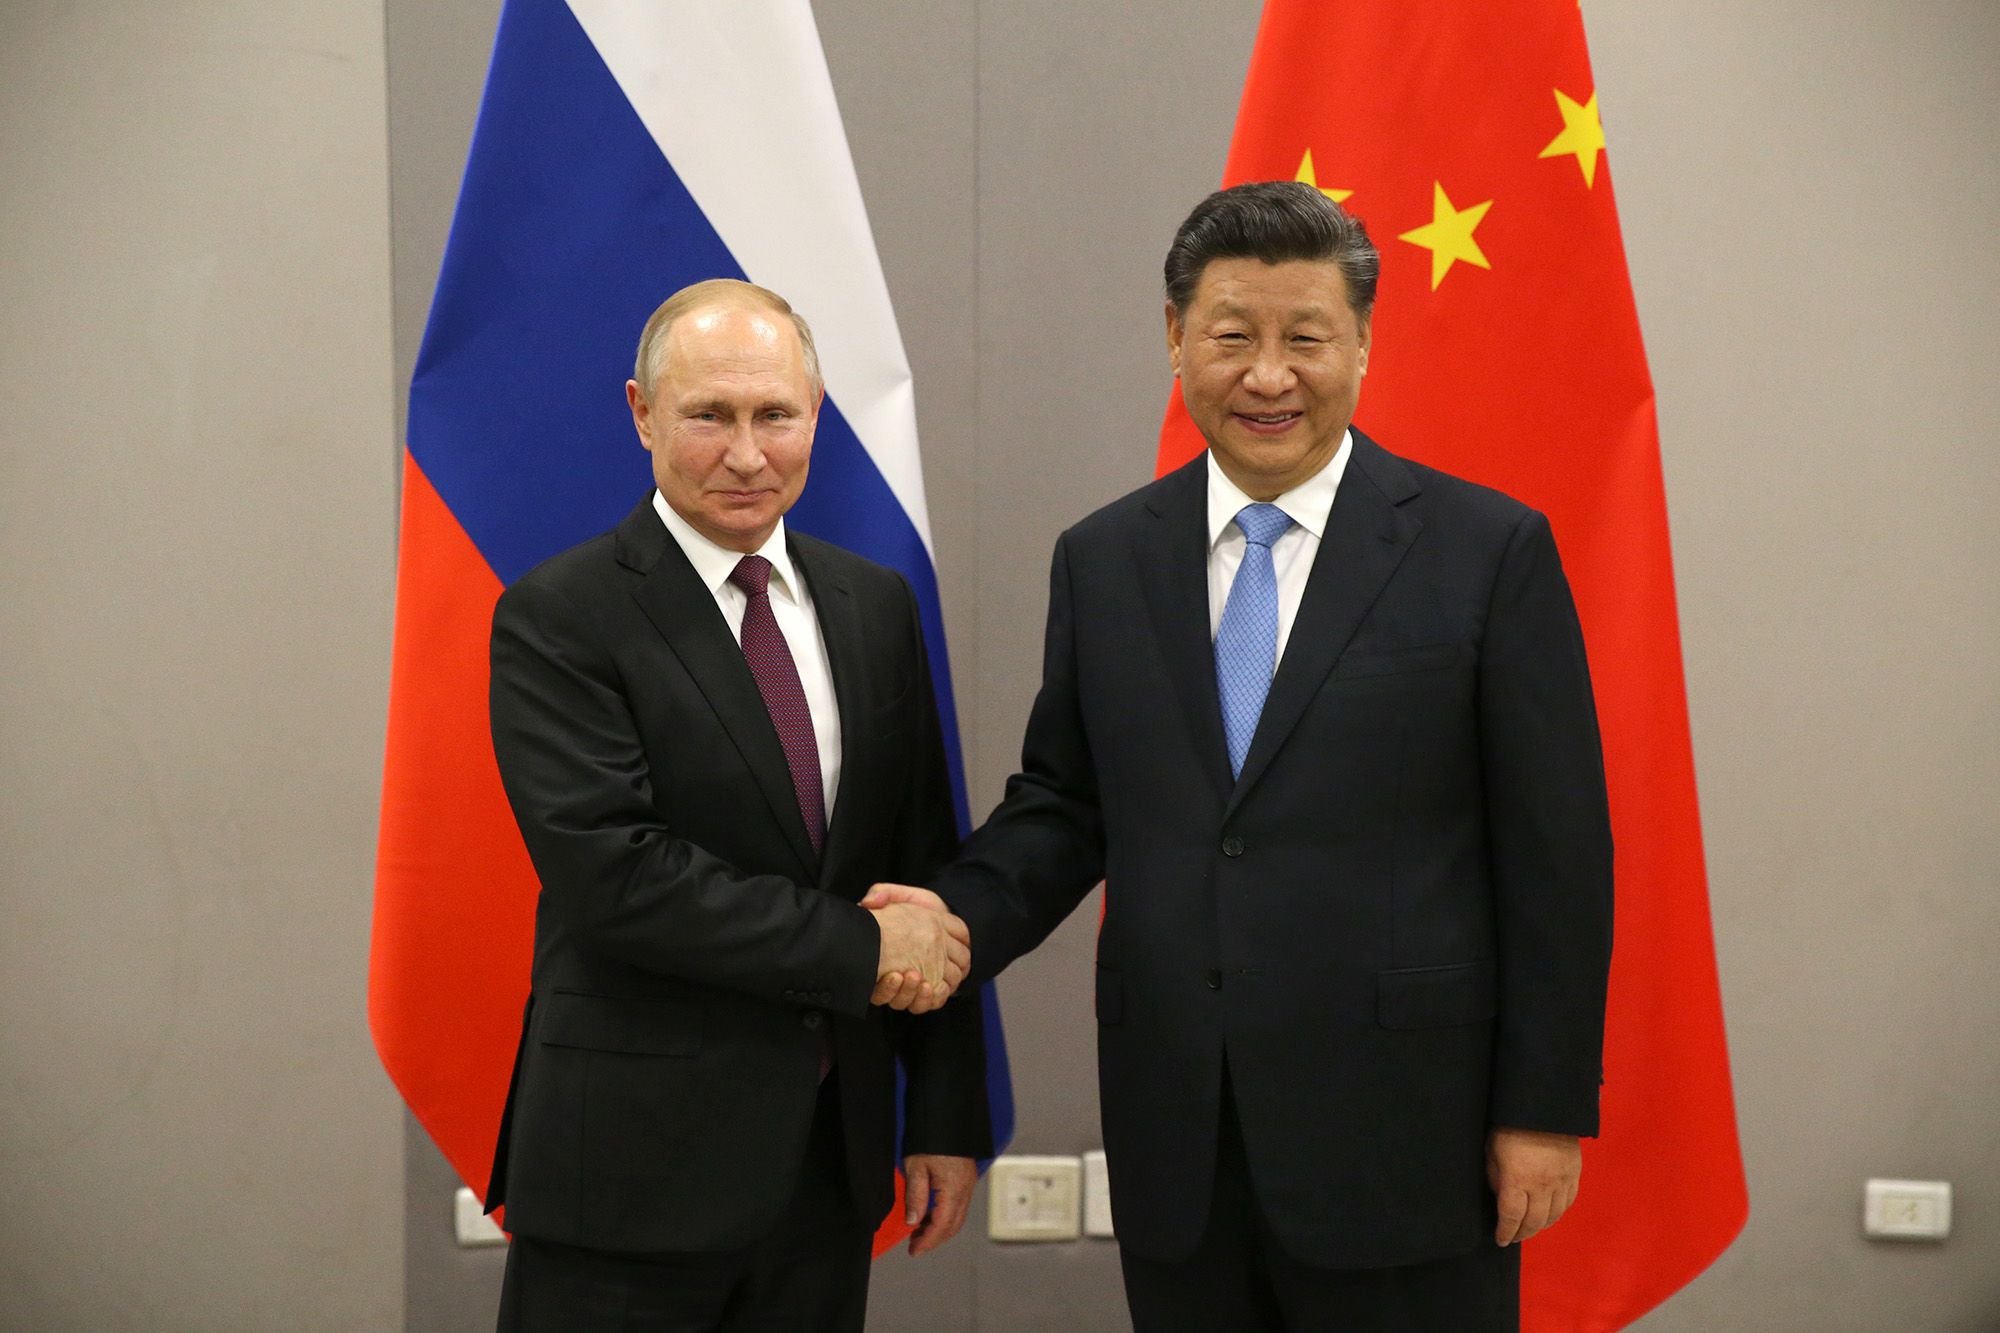 SCO Summit: Putin needs Xi Jinping's help more than ever after his setbacks in Ukraine | CNN